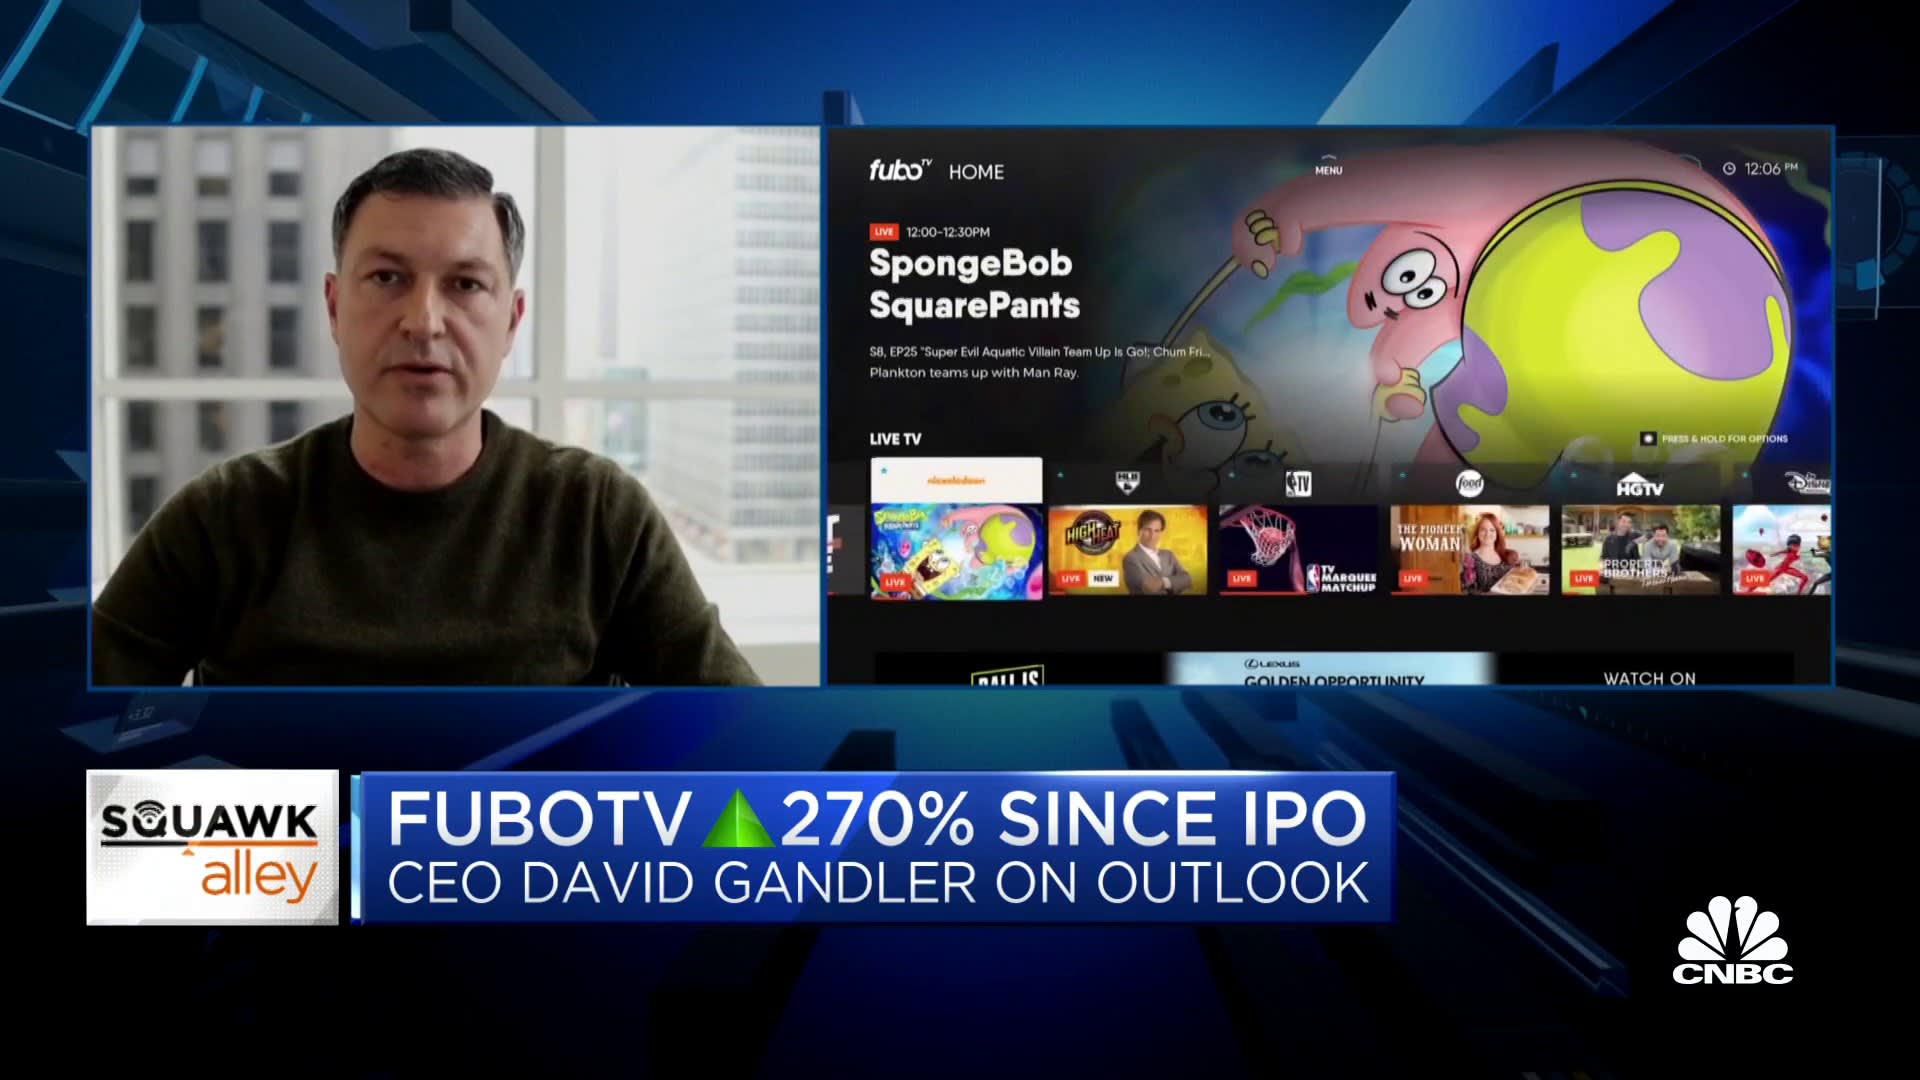 FuboTV CEO on outlook after stock has surged since IPO